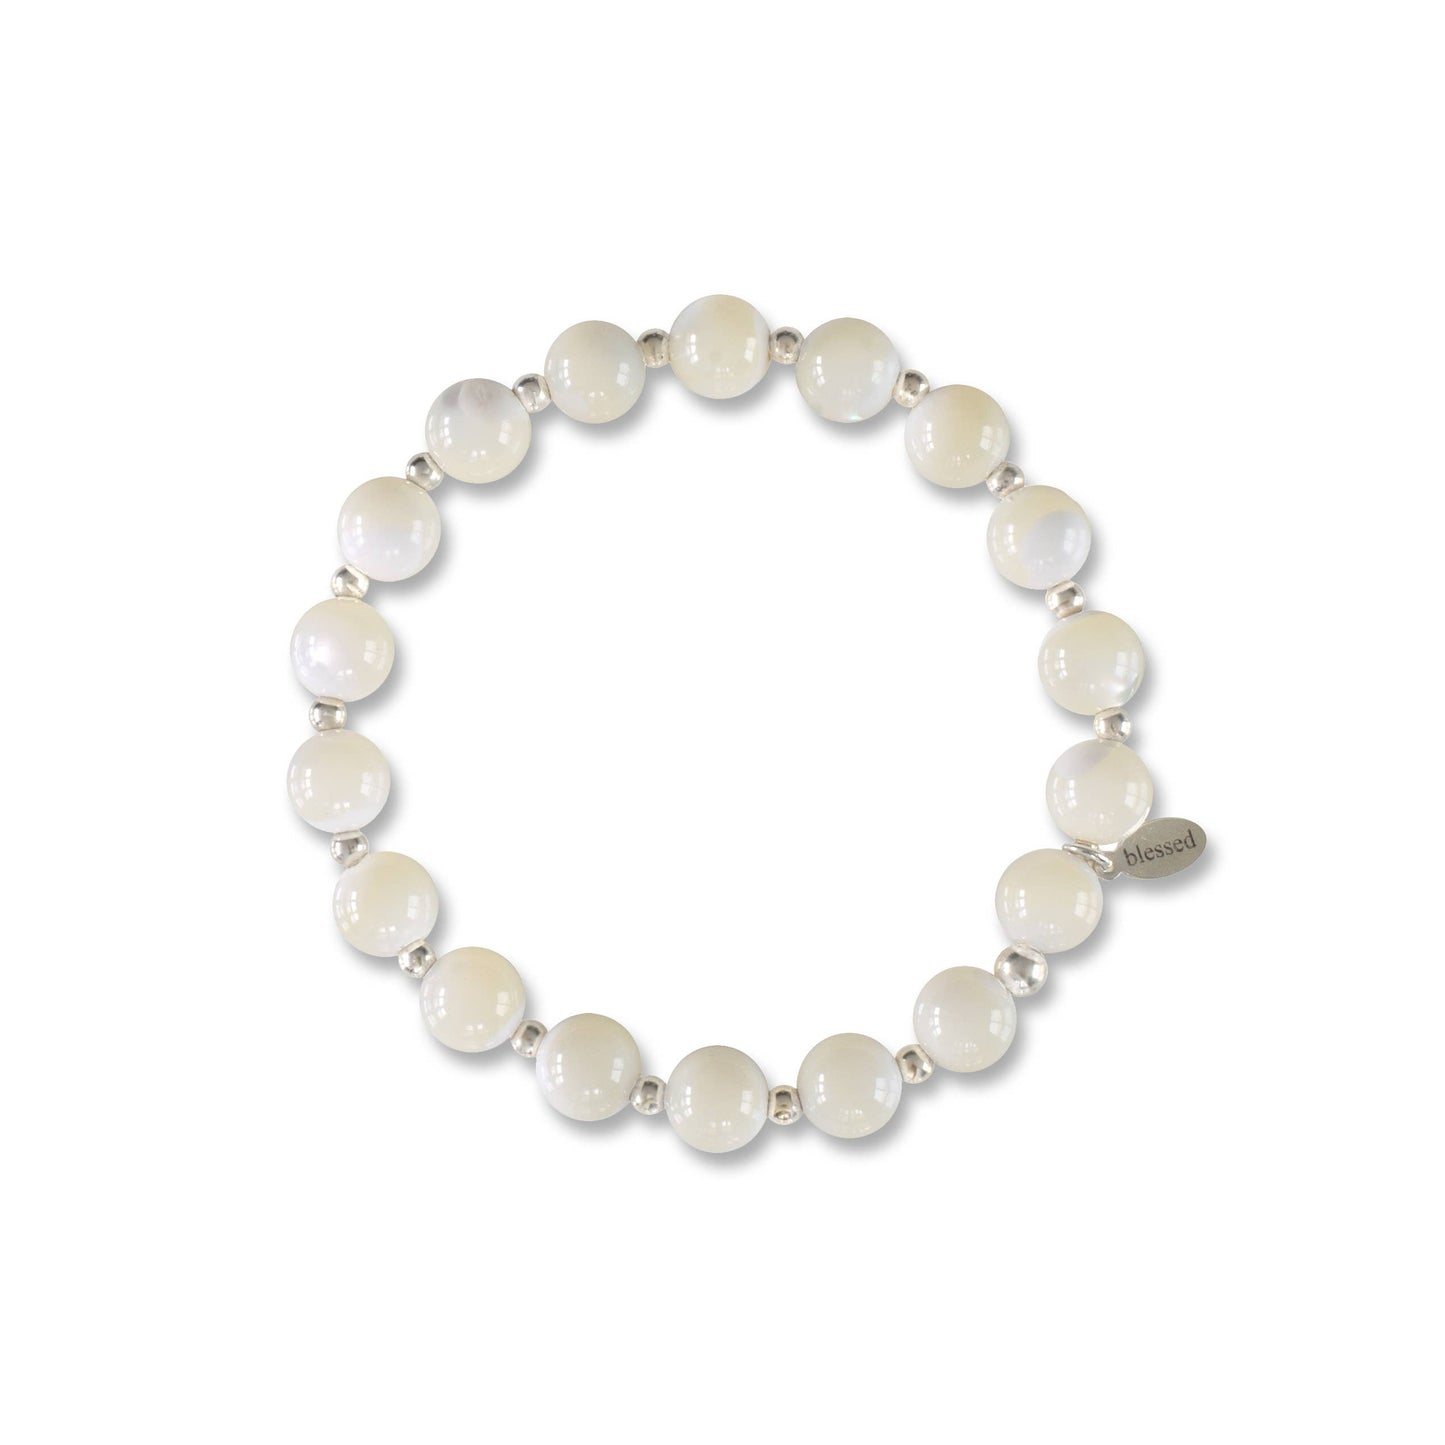 Count Your Blessings Bracelet in Mother of Pearl: L